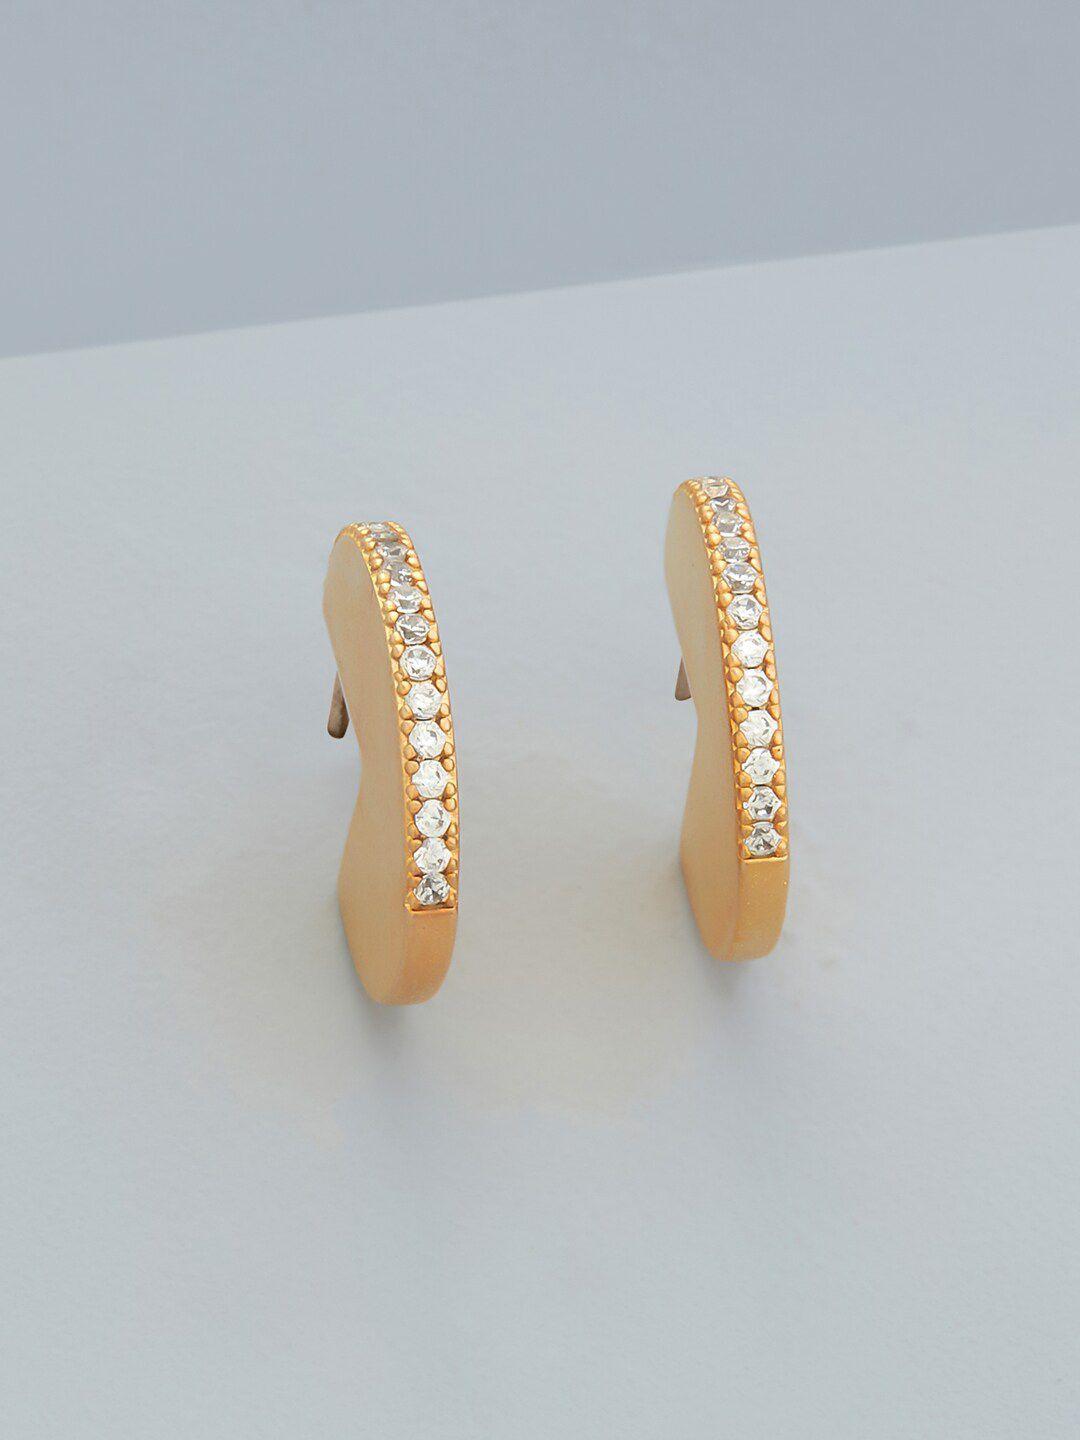 kushal's fashion jewellery gold-plated circular studs earrings